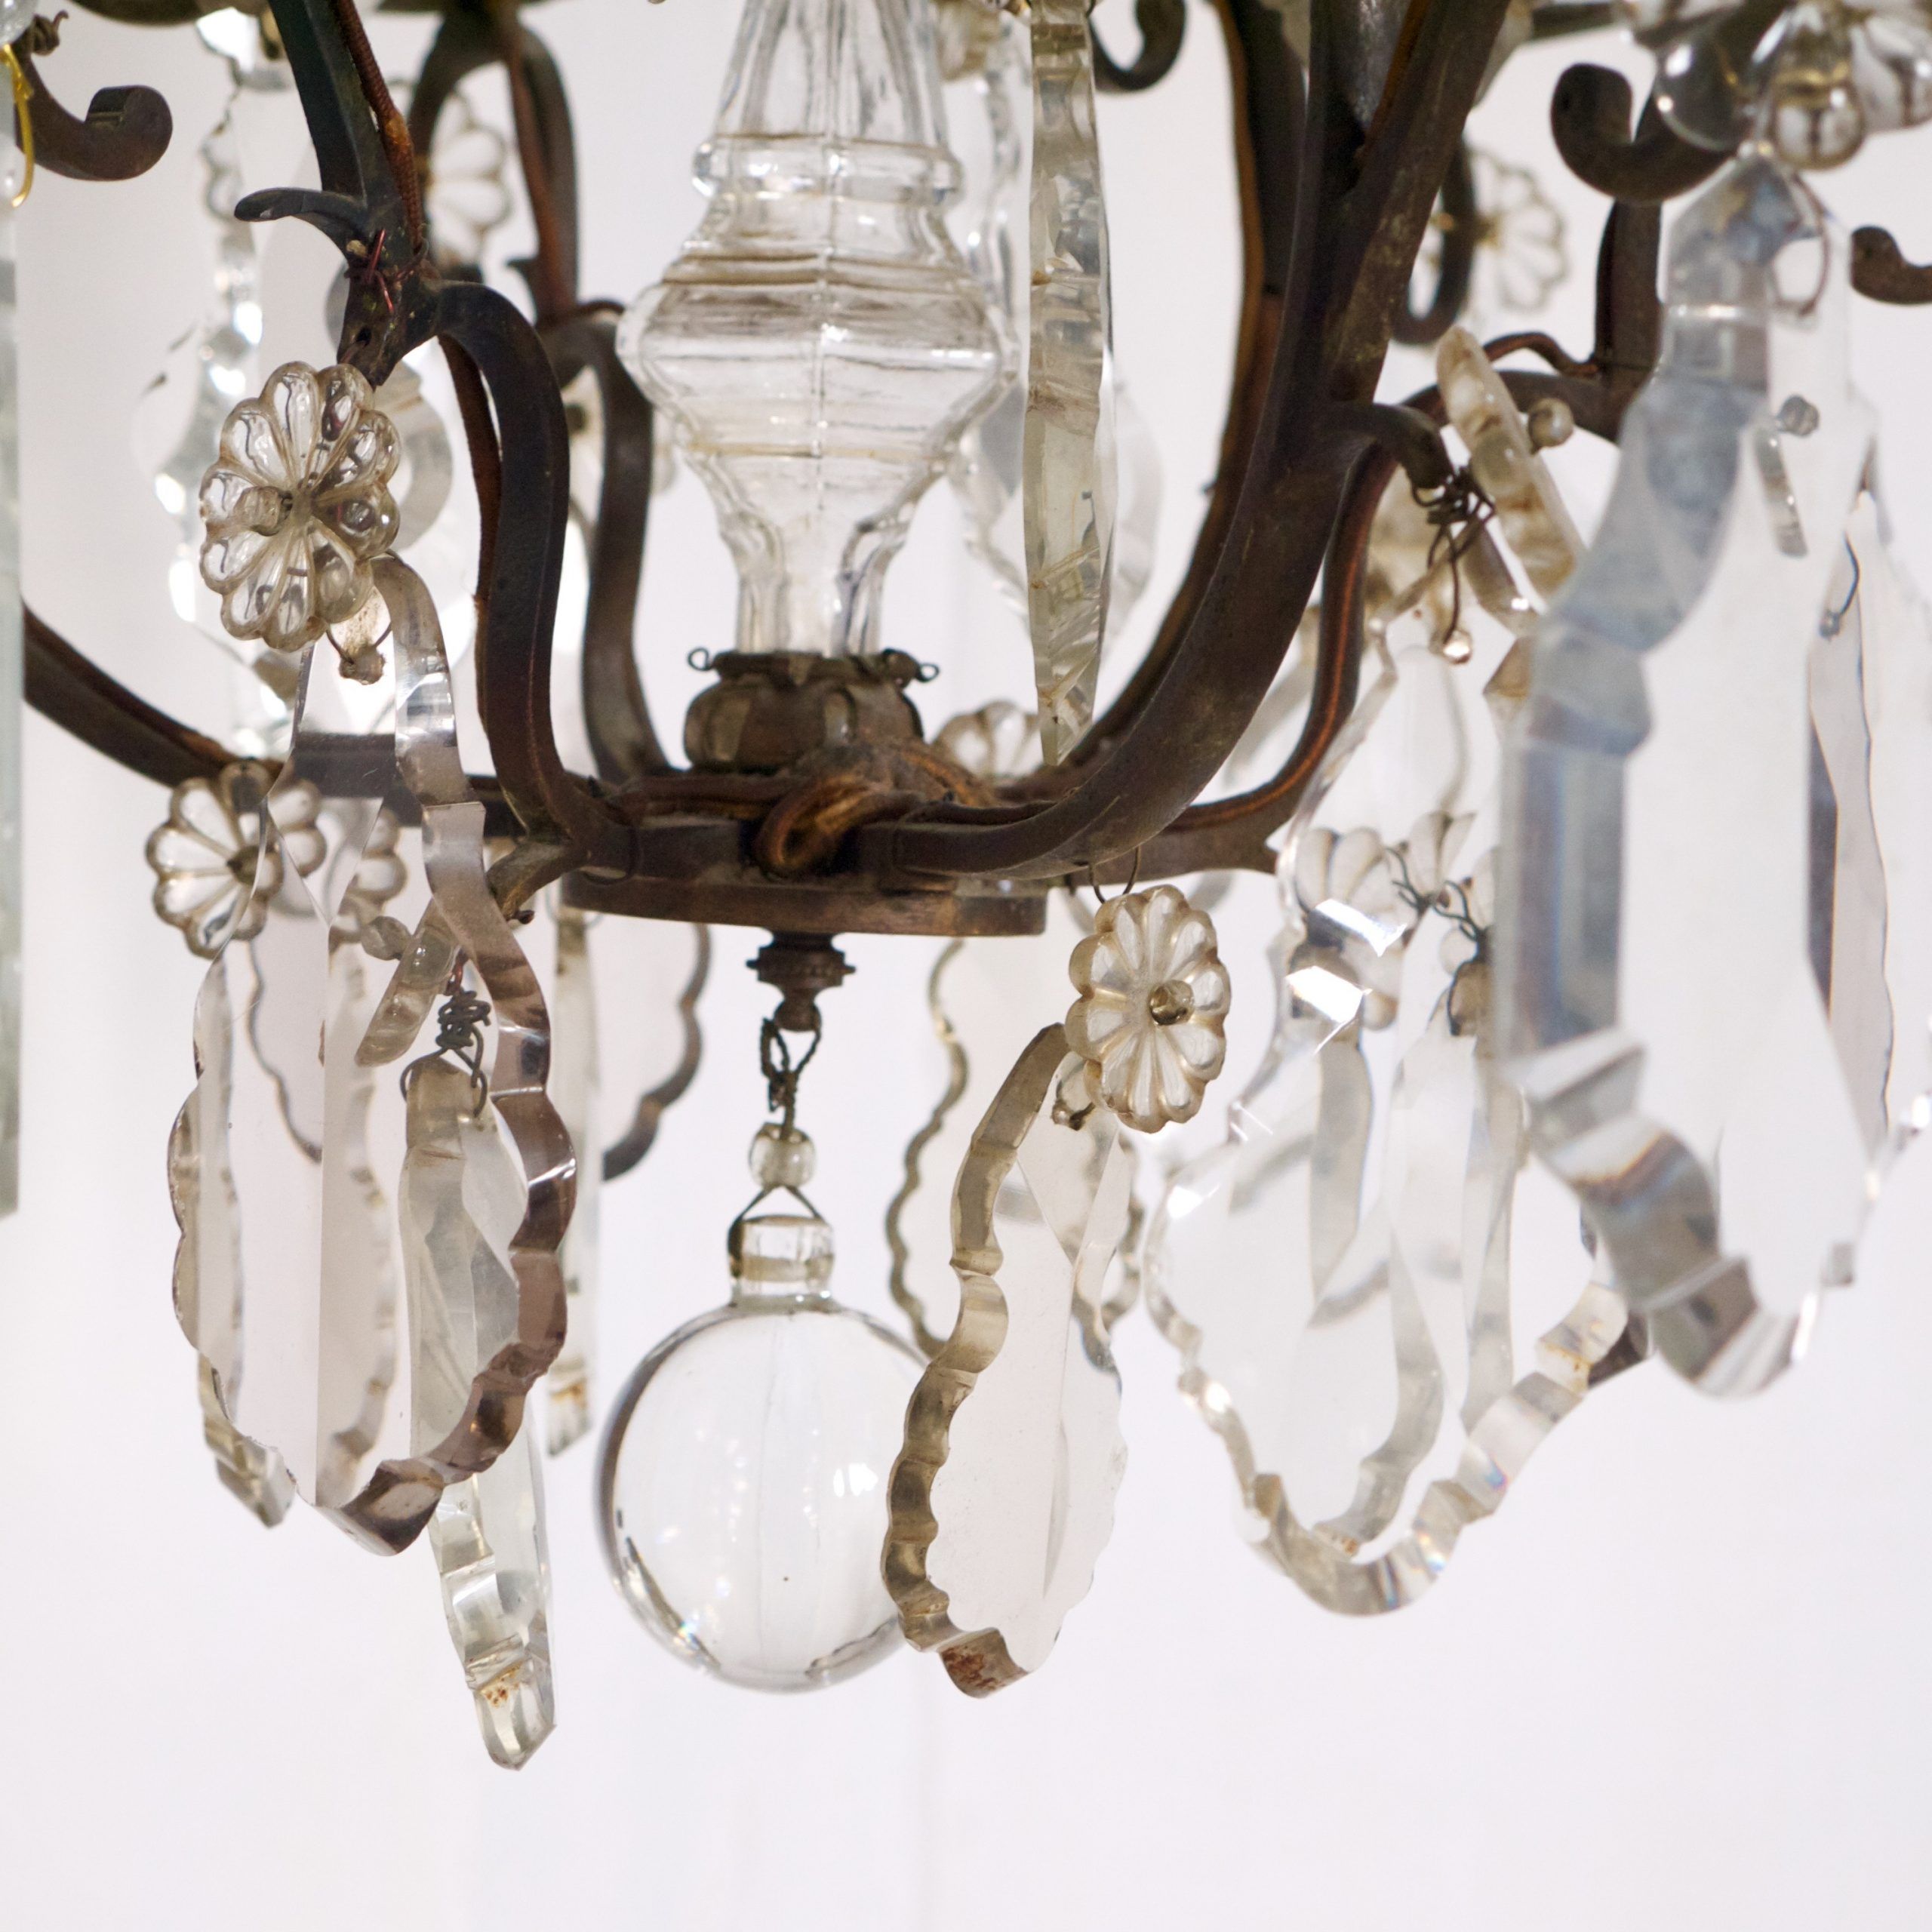 Antique Crystal French Bronze Chandelier | Omero Home With Regard To Antique Brass Crystal Chandeliers (View 12 of 15)